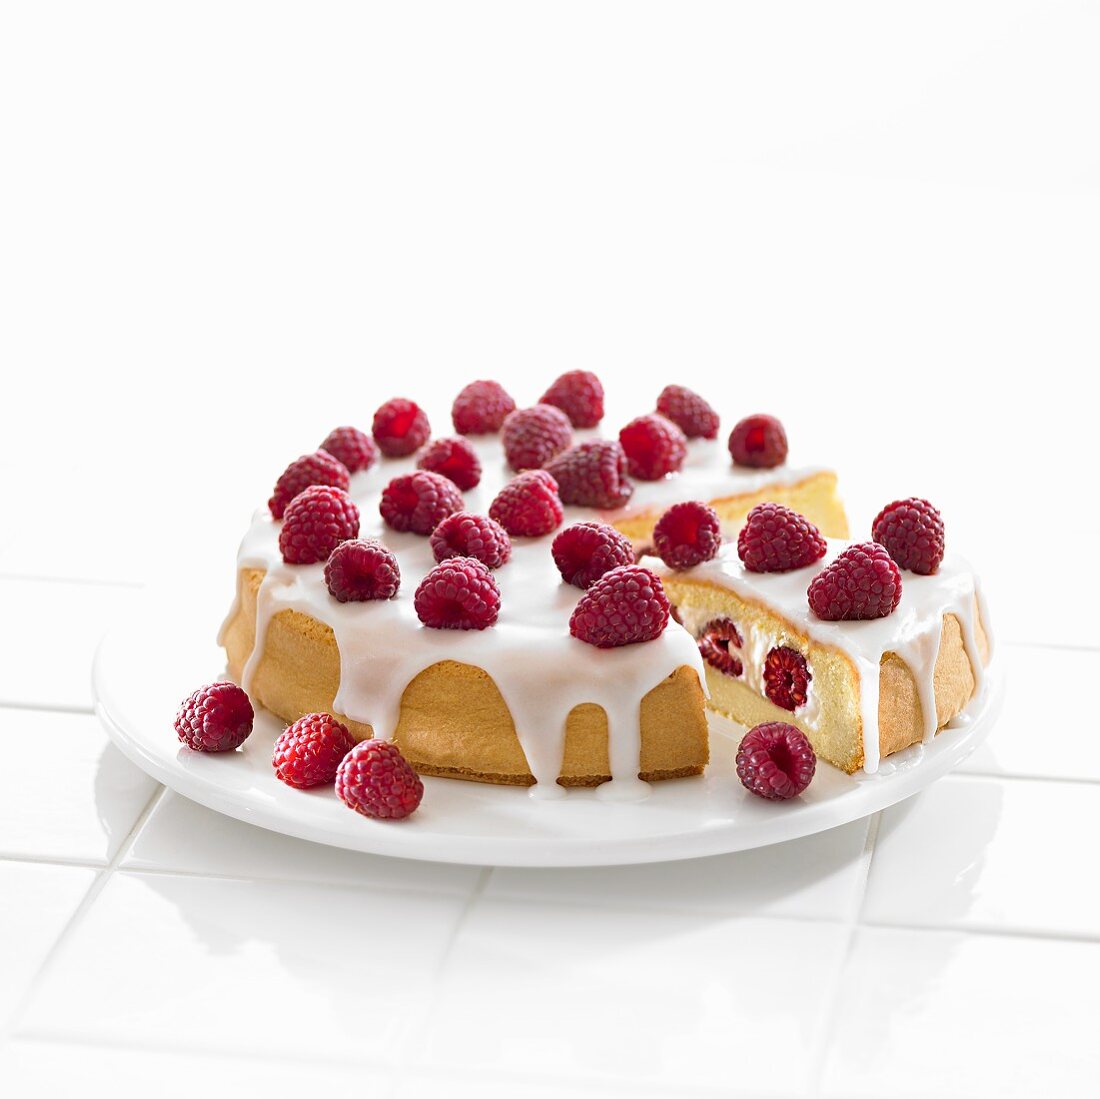 Raspberry sponge cake with whipped cream and icing